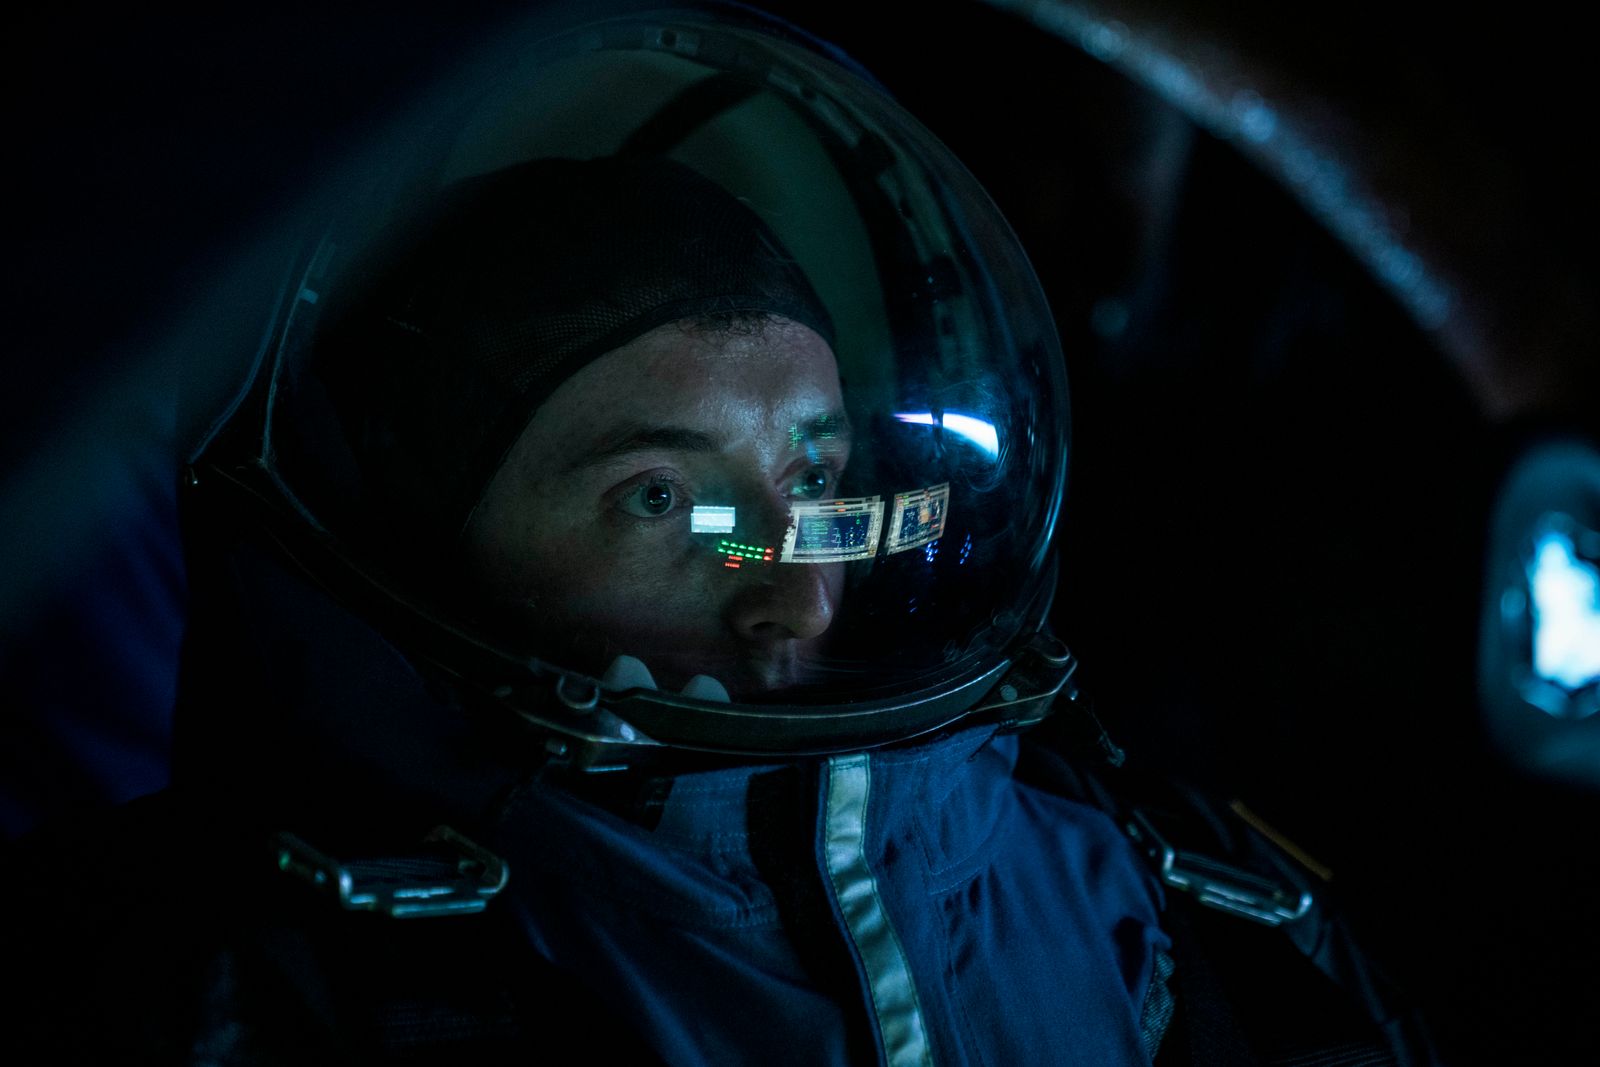 © Mackenzie Calle - Brian Murphy during flight simulations after donning an astronaut suit for the first time.